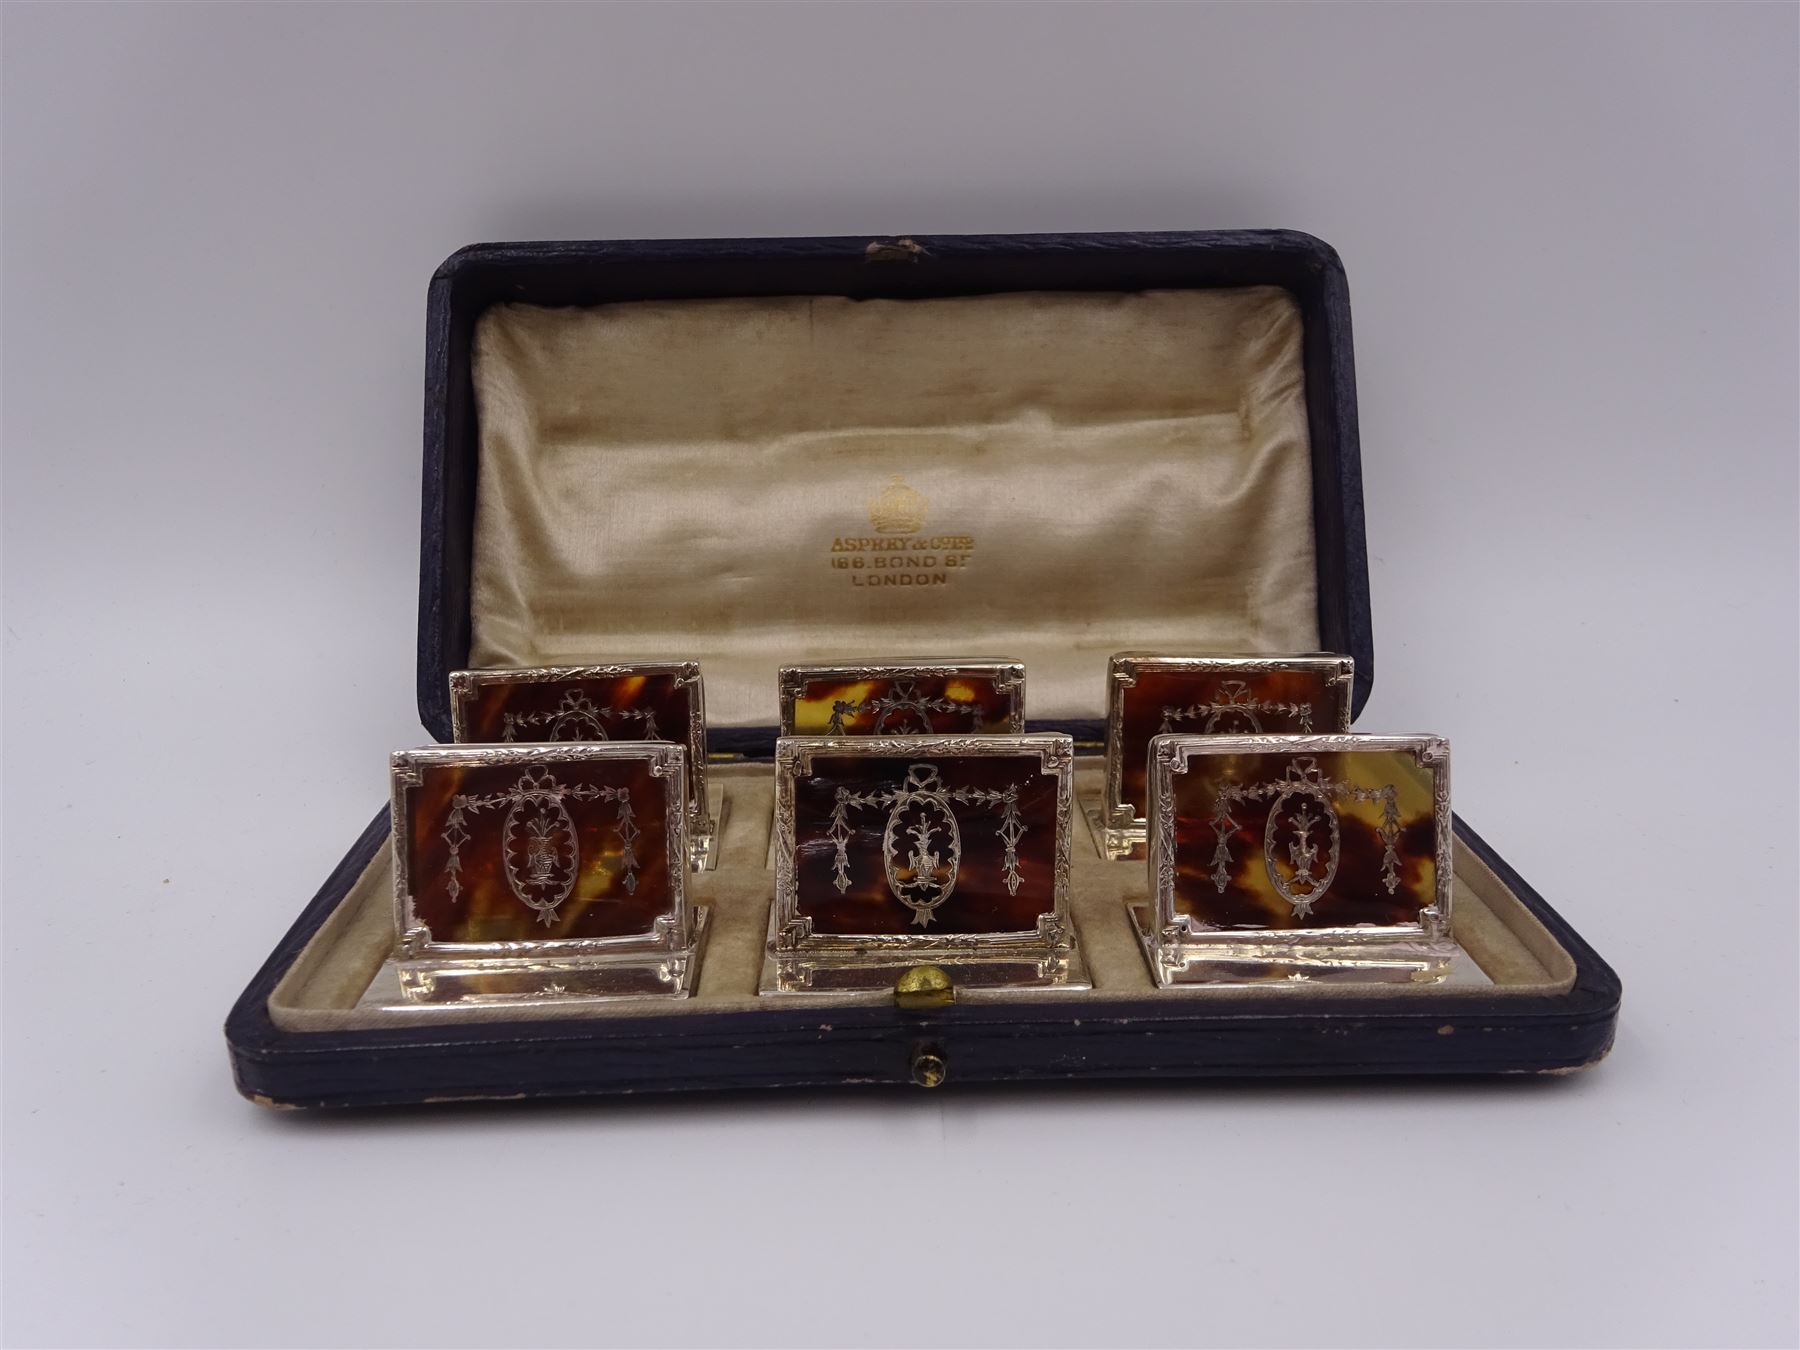 Set of six early 20th century silver mounted tortoiseshell place card holders by Asprey - Image 21 of 28